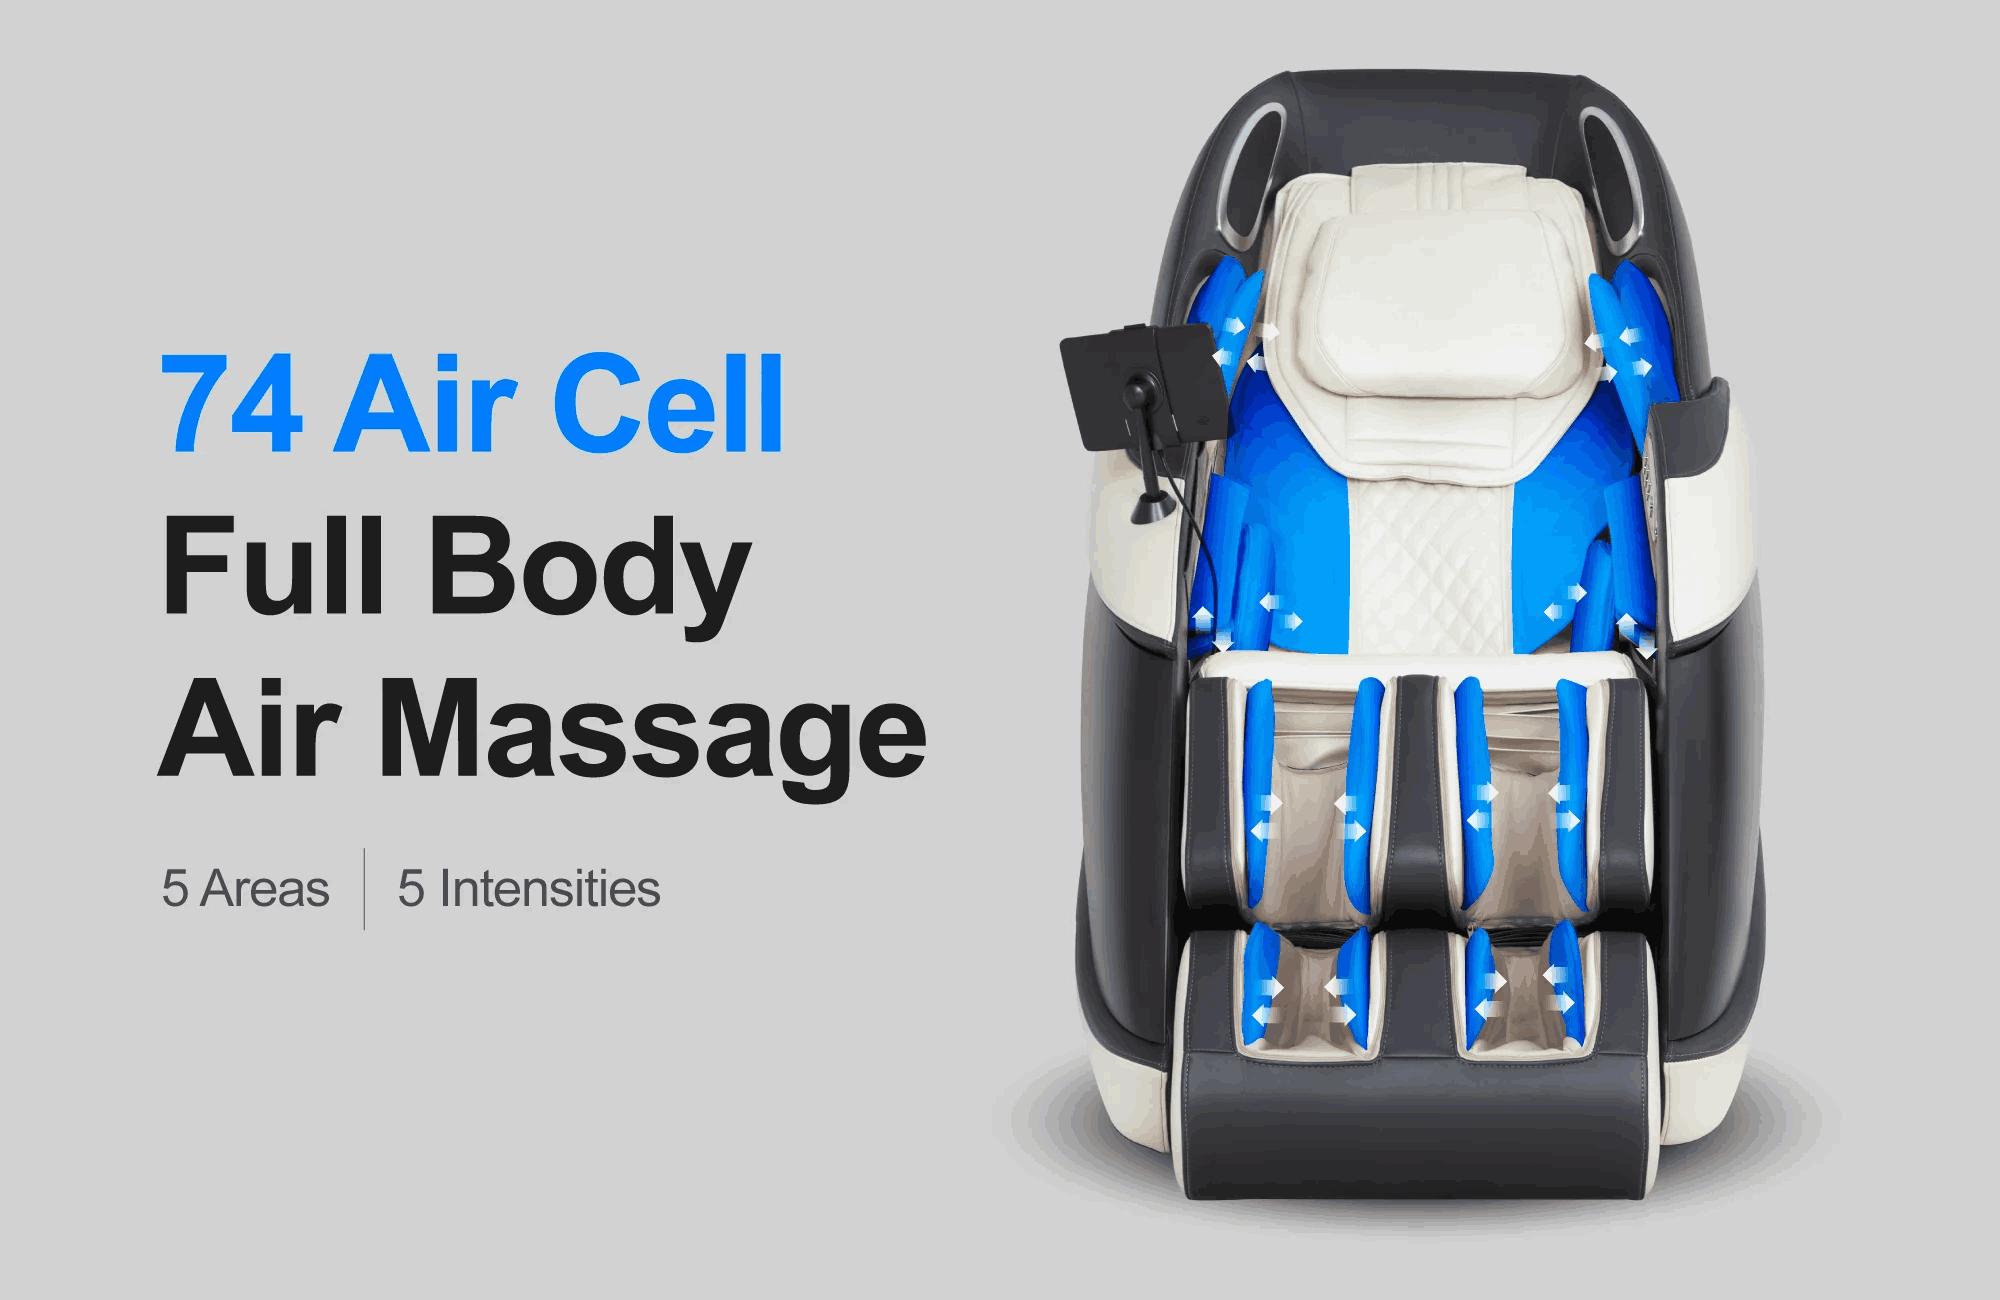 6.Fleetwood product feature air massage 2x 100